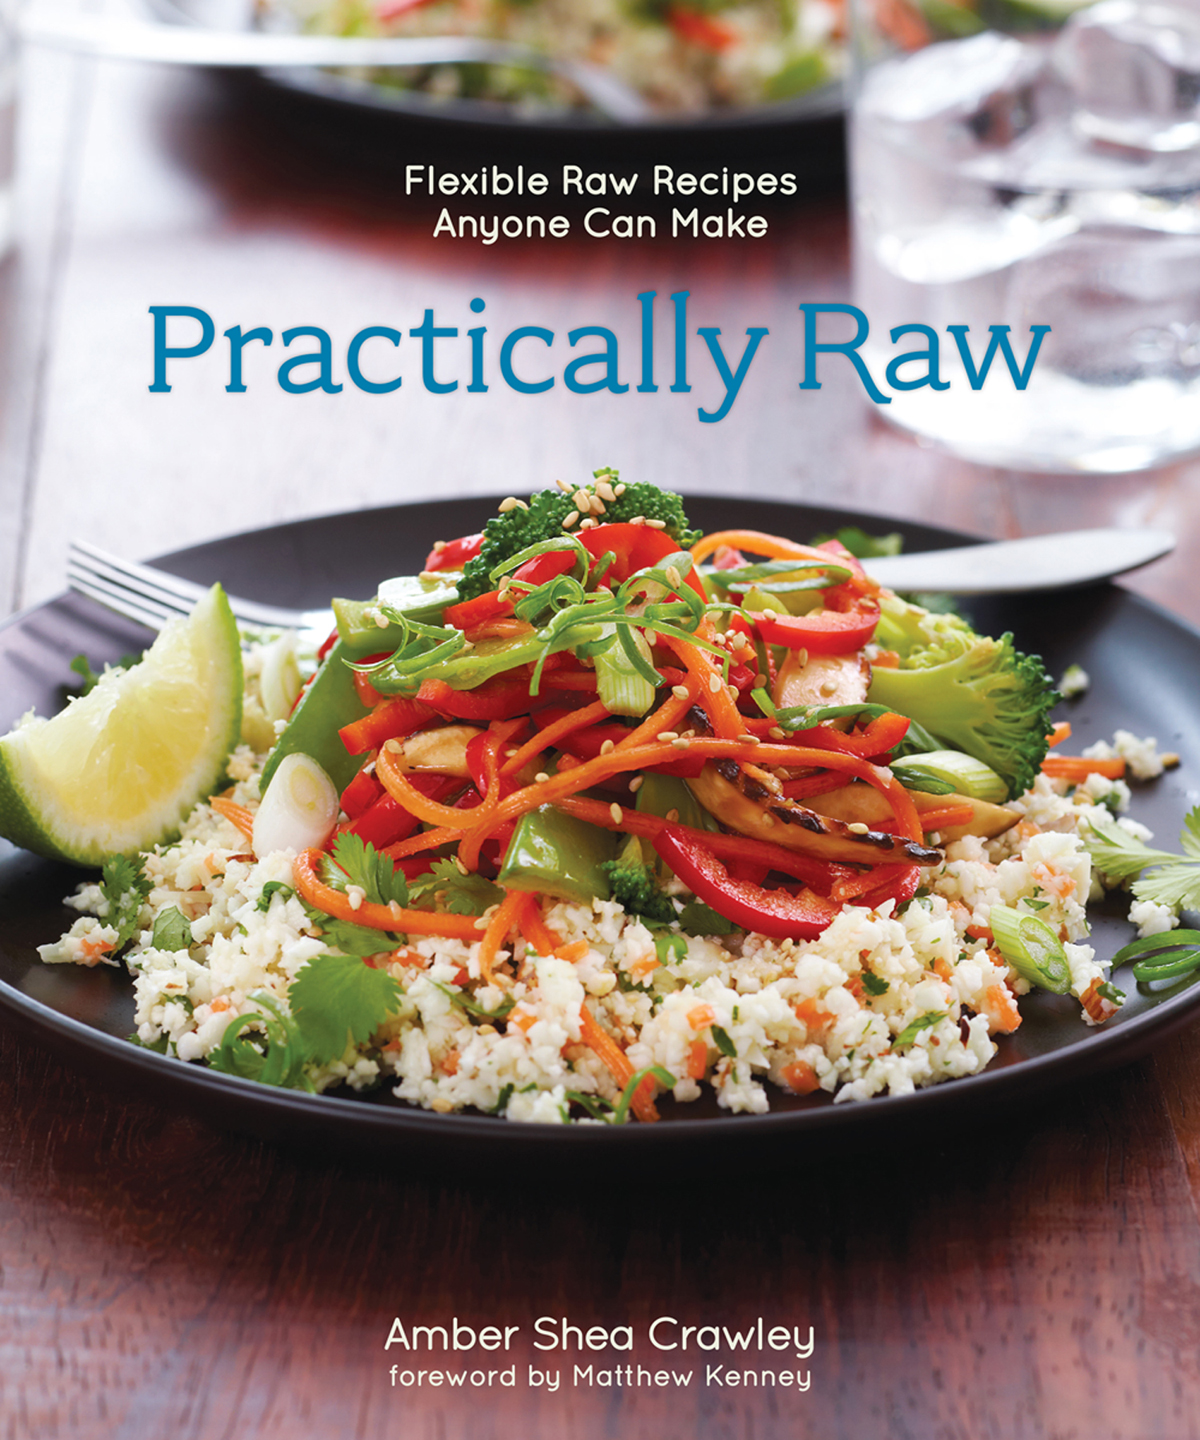 About the Author Amber Shea Crawley is a certified raw chef and writer trained - photo 1